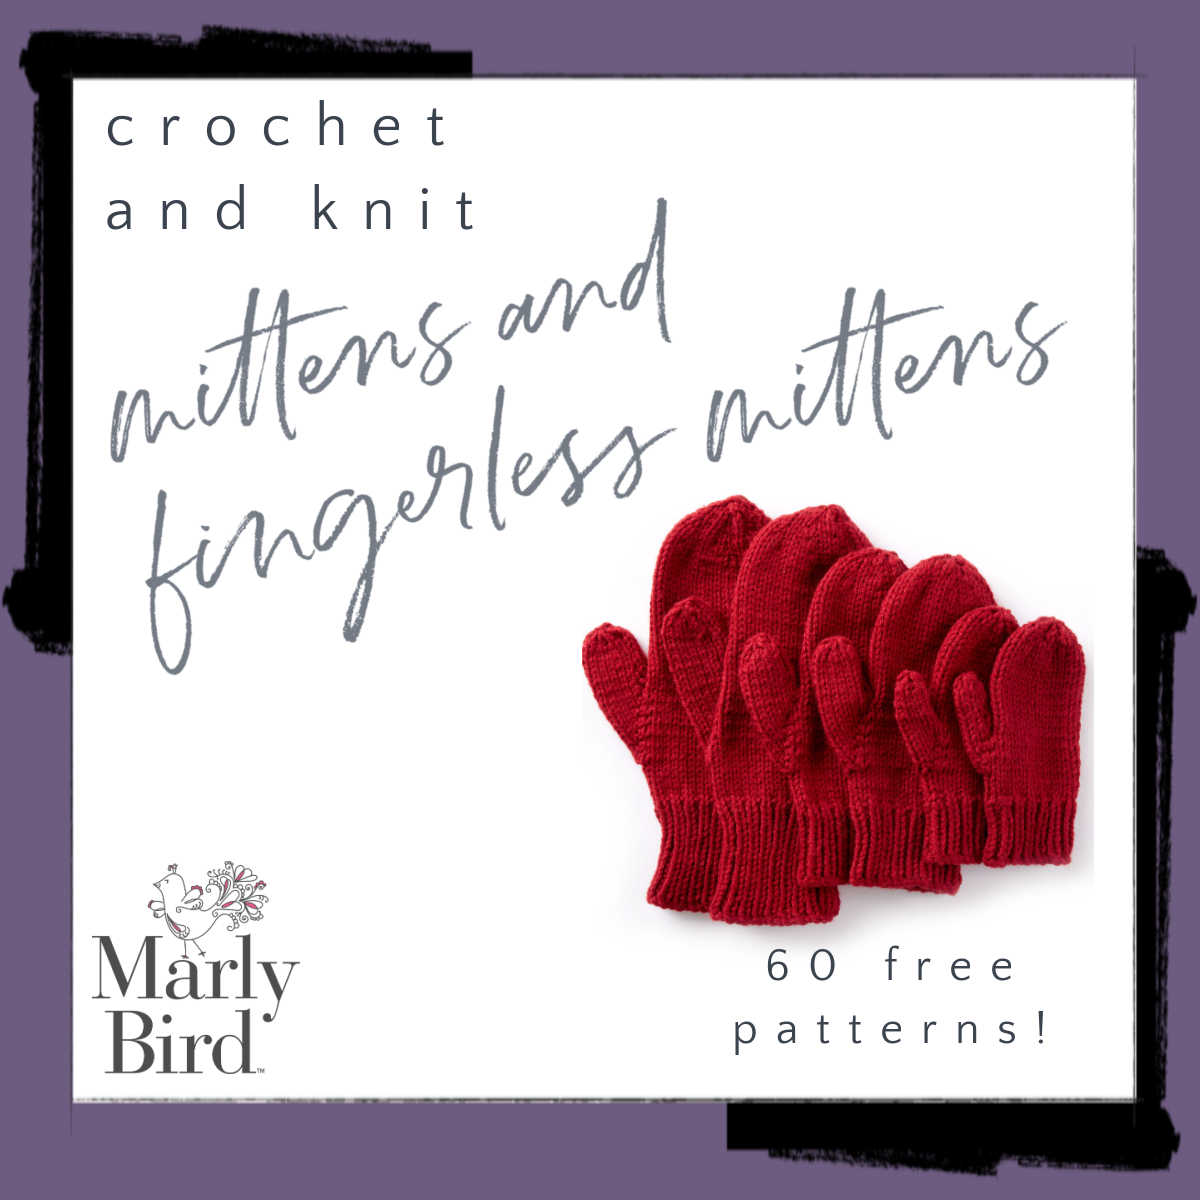 60 Mittens and Fingerless Mitts Free Crochet and Knit Patterns | Marly Bird